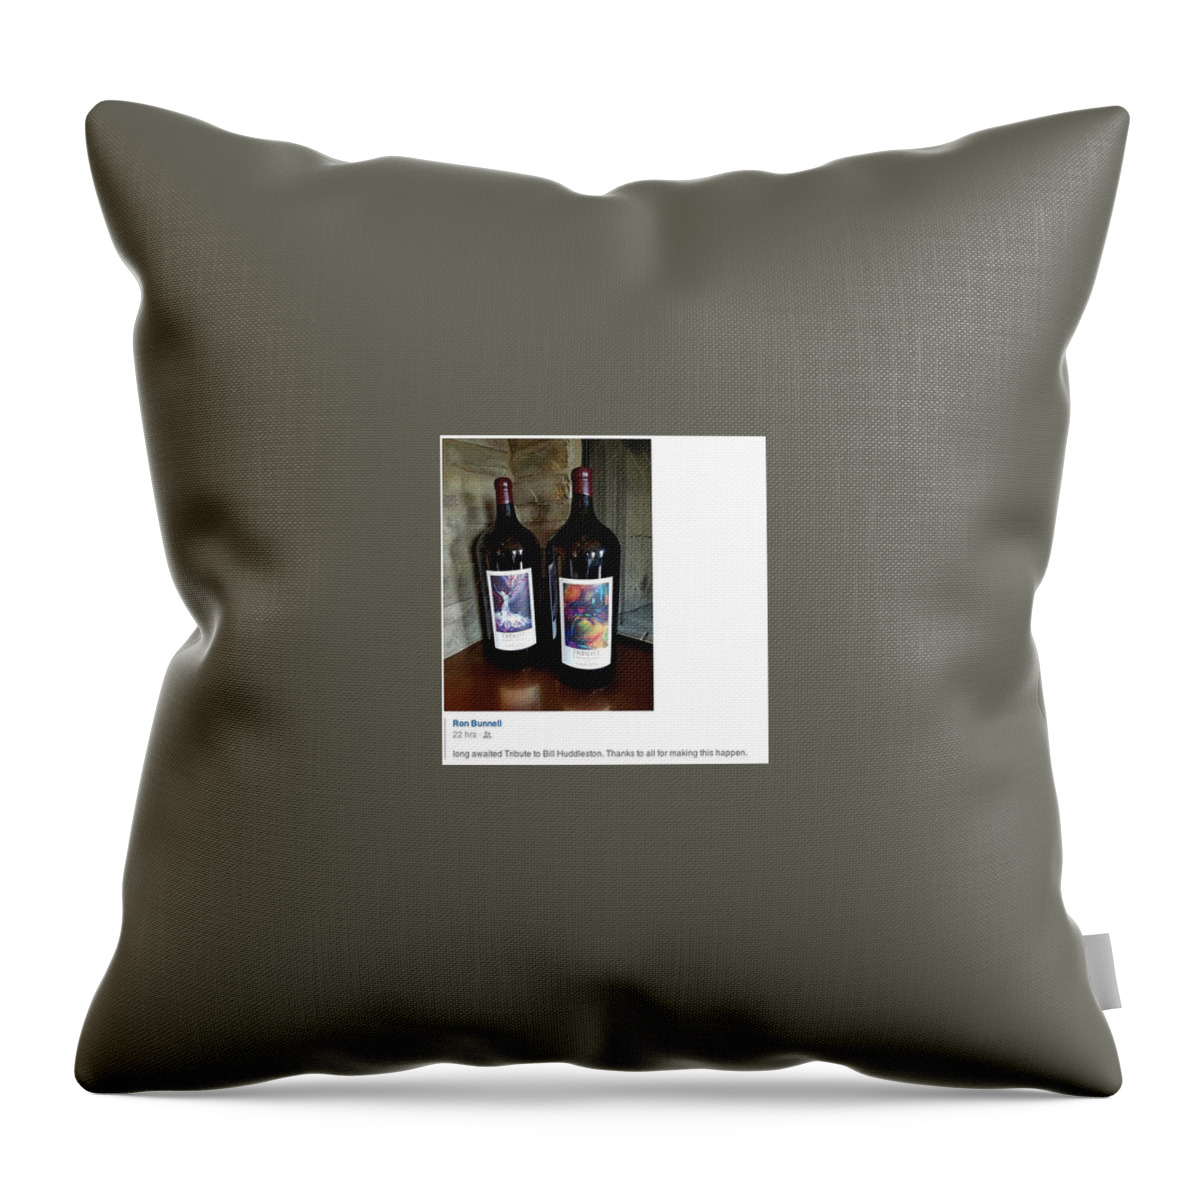  Throw Pillow featuring the painting Wine Labels by Janice Nabors Raiteri